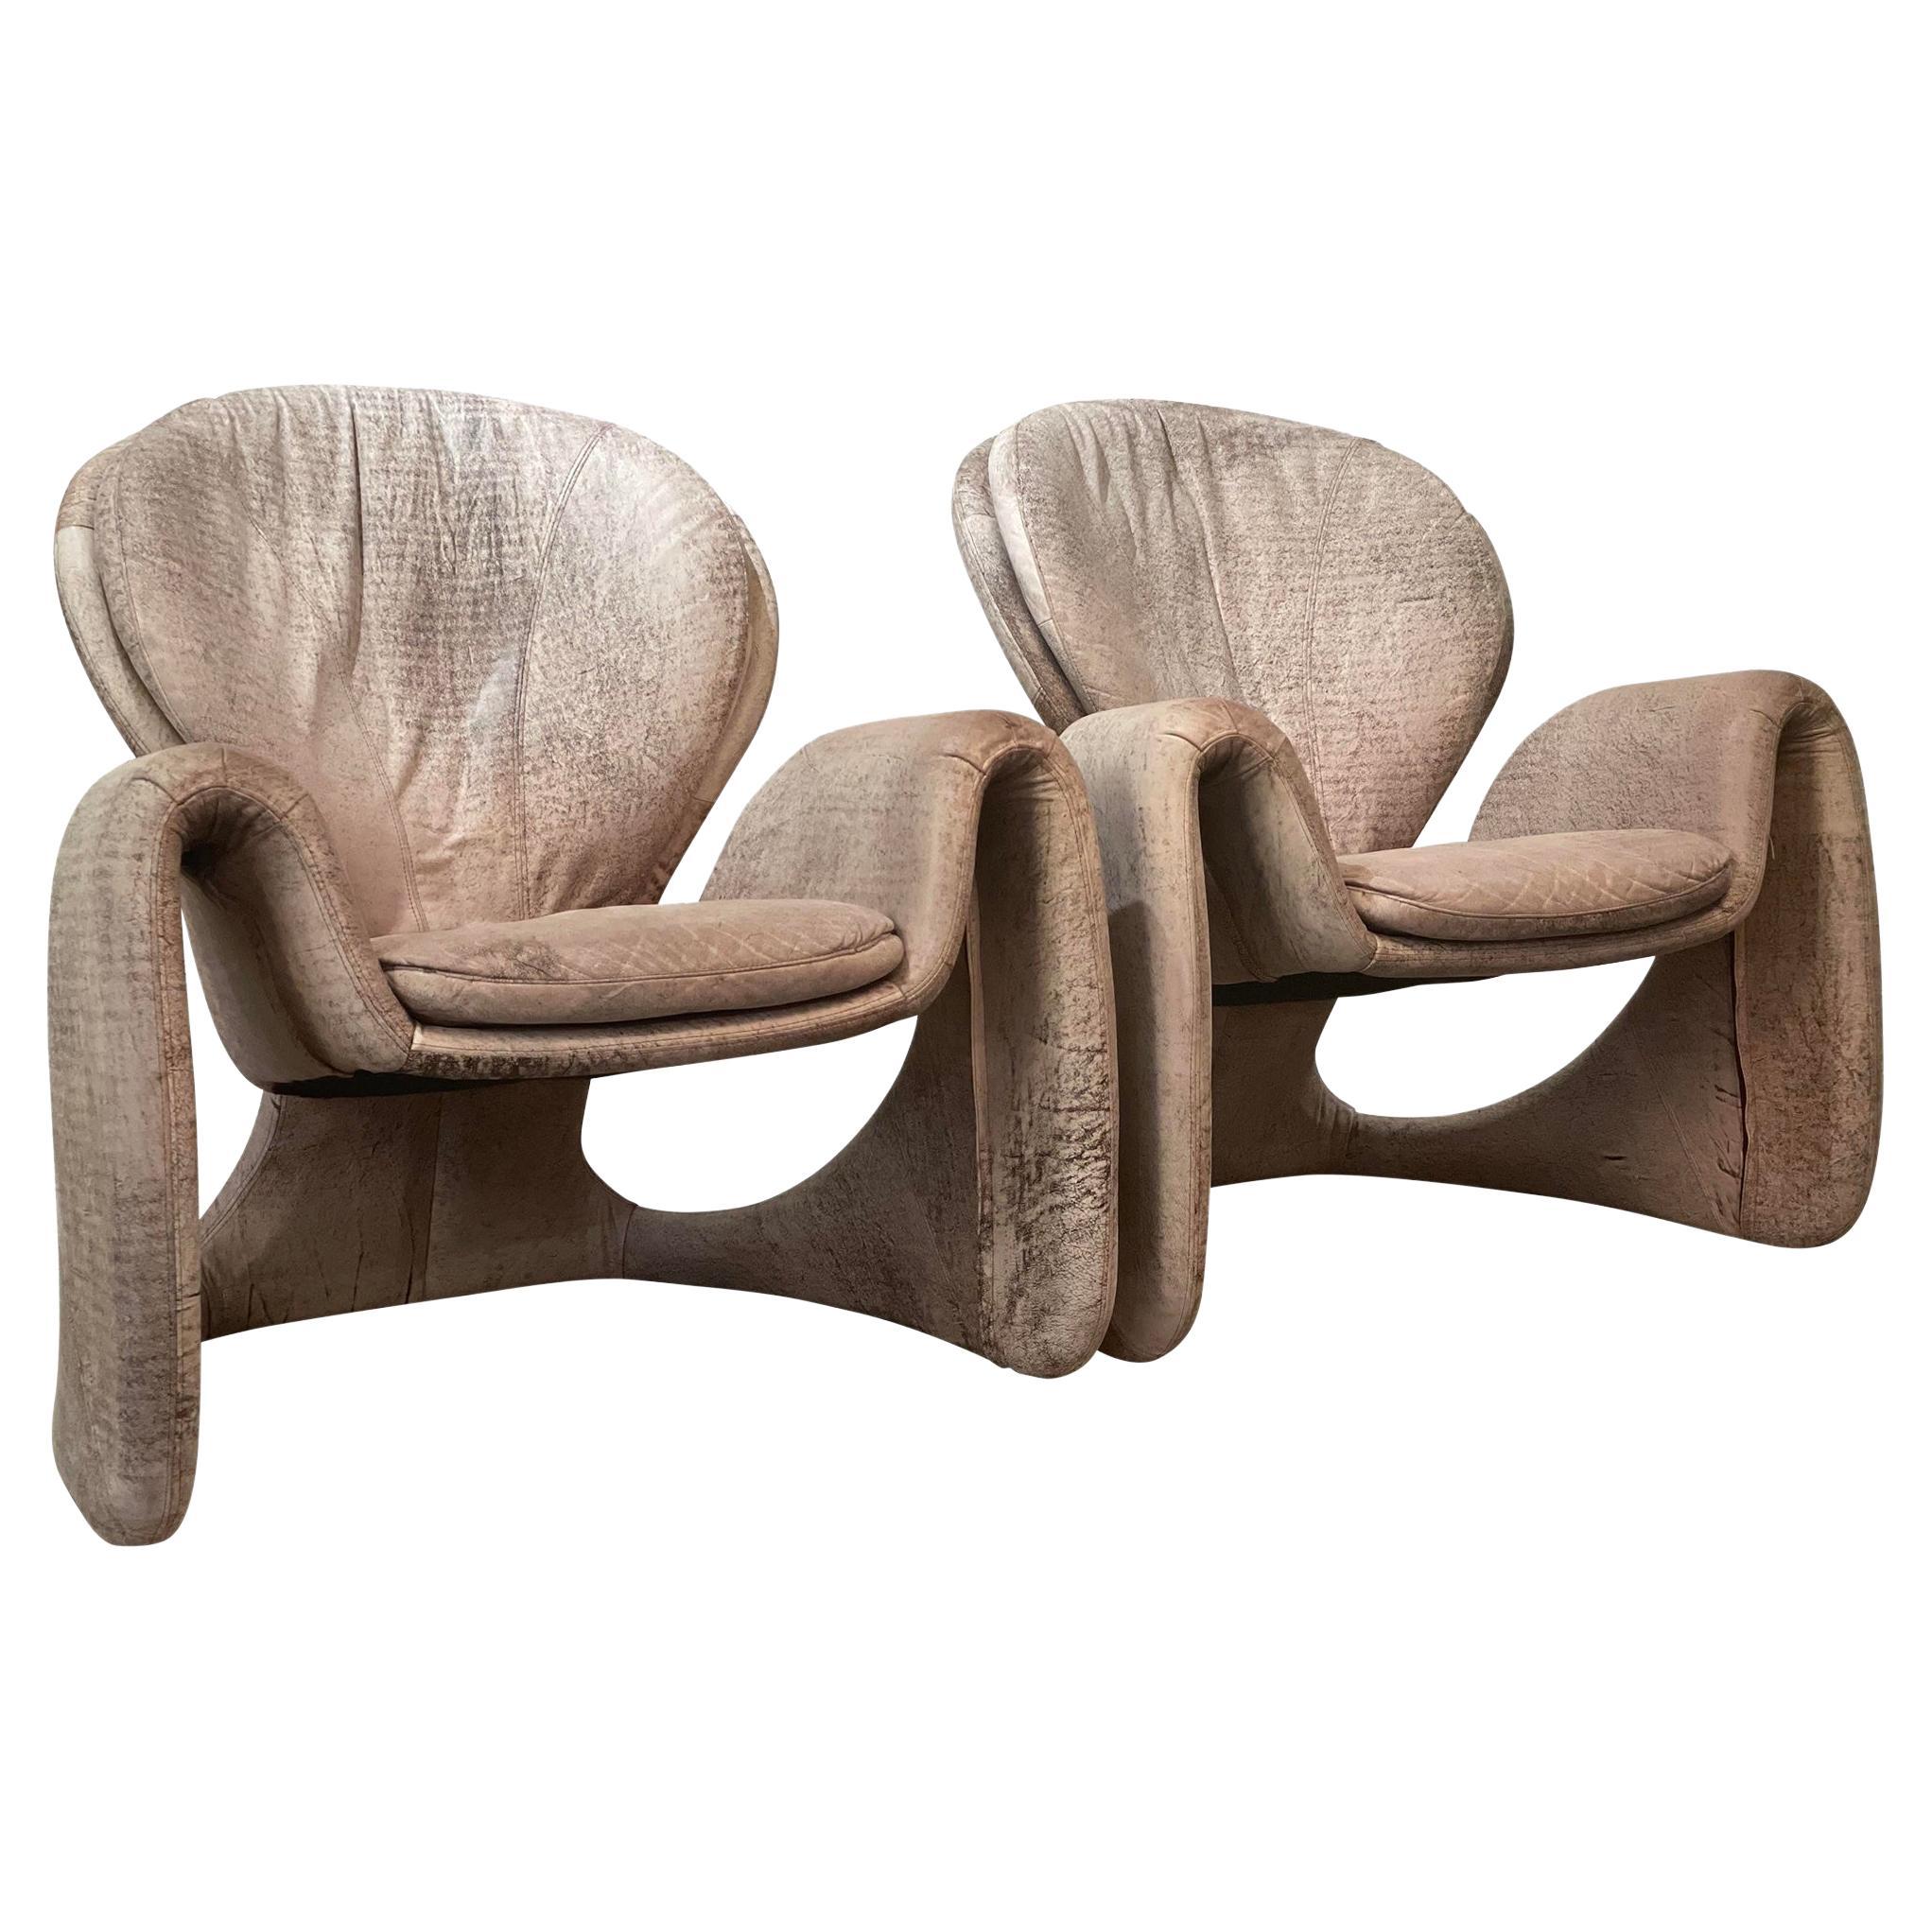 Postmodern Vintage Distressed Leather Sculptural Chairs, Pair For Sale